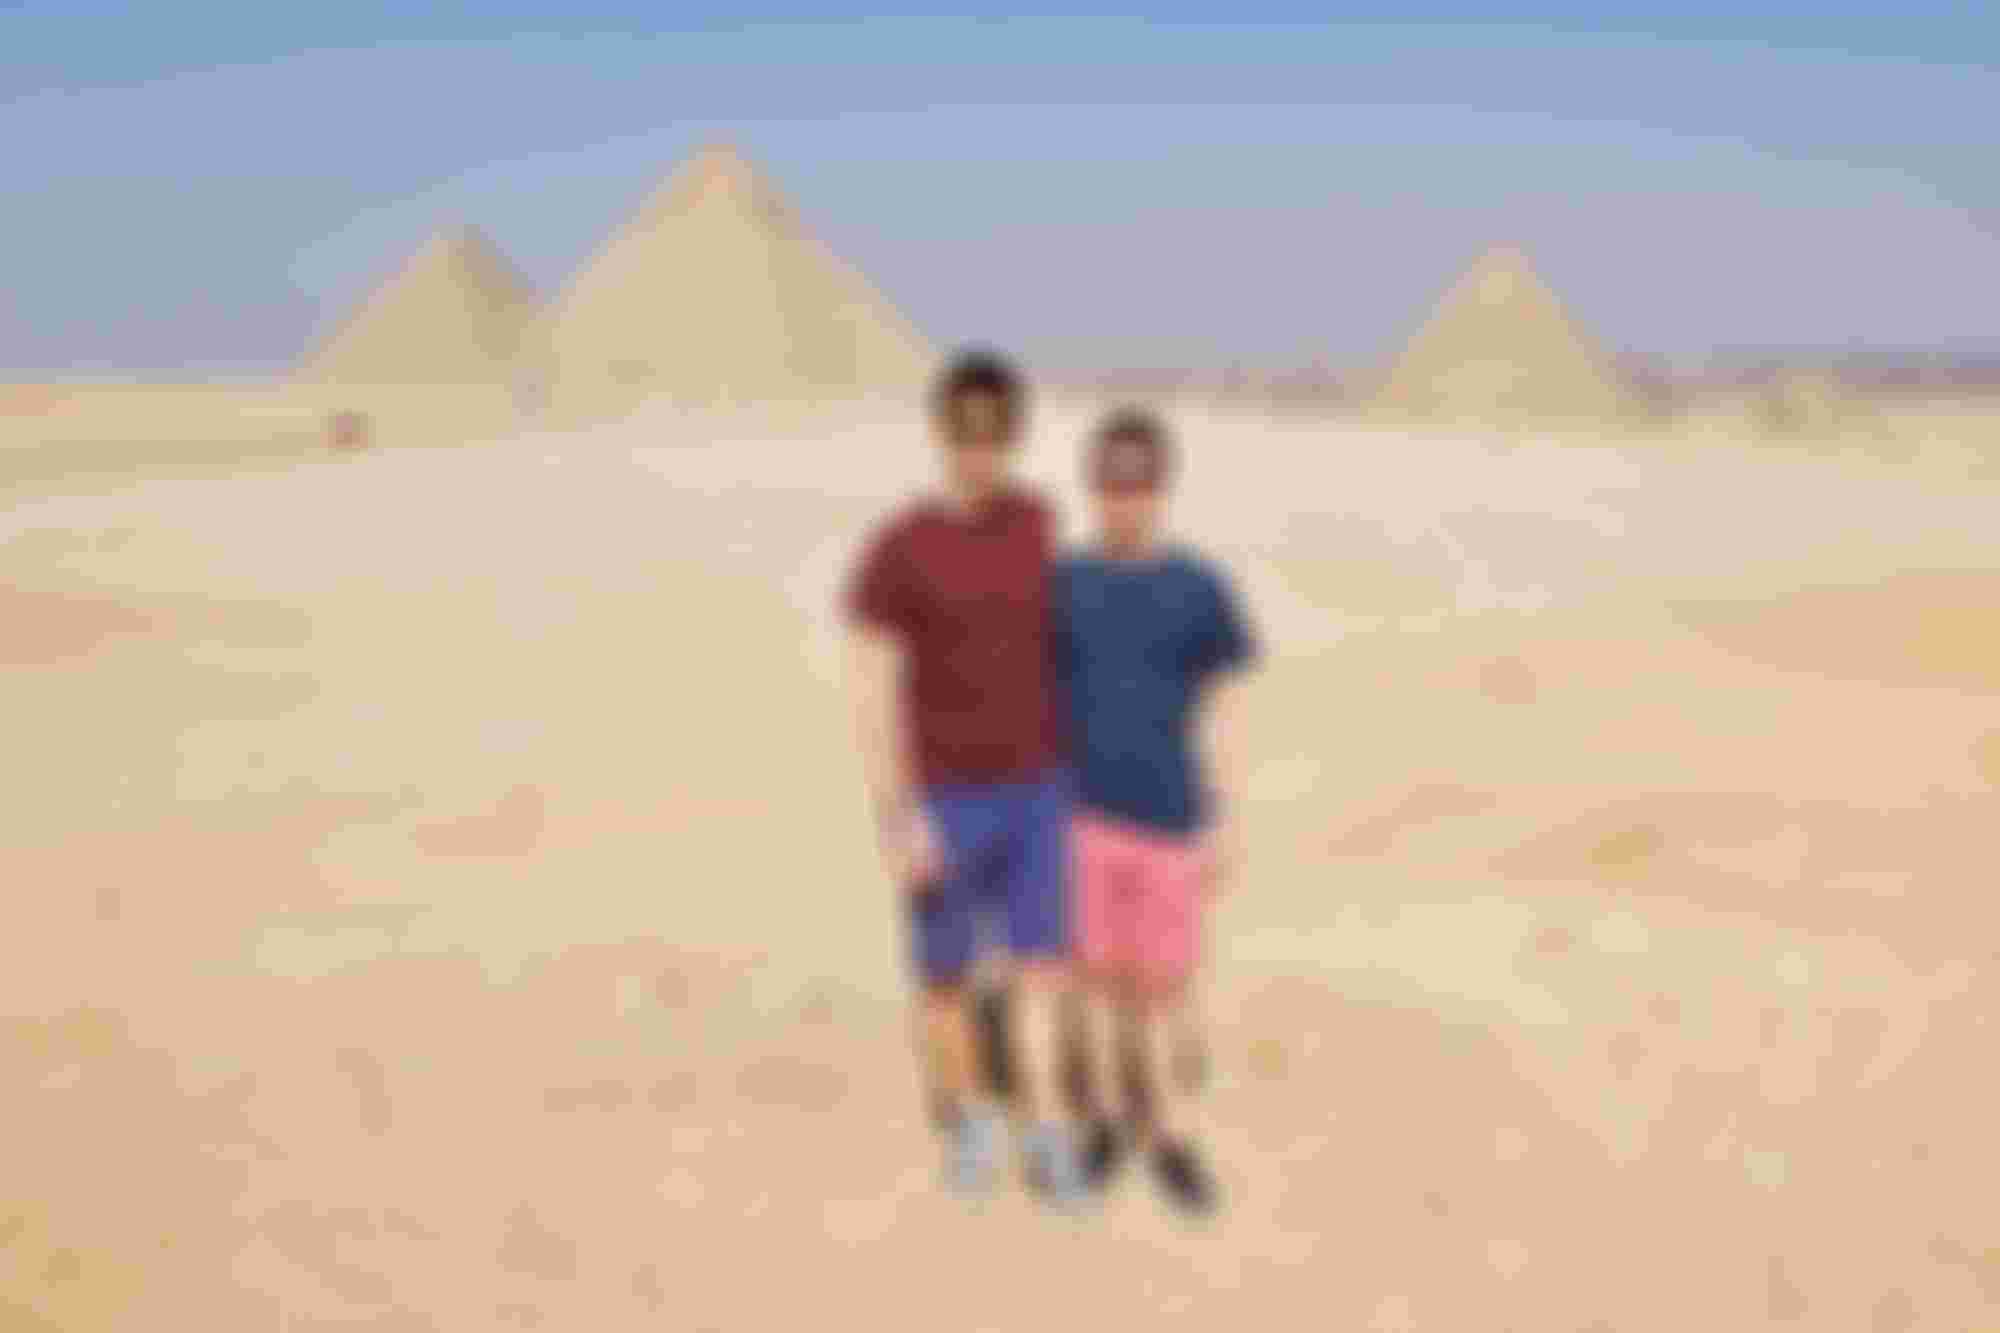 I'm pretty sure we're the only two people in all of Egypt that were wearing shorts.